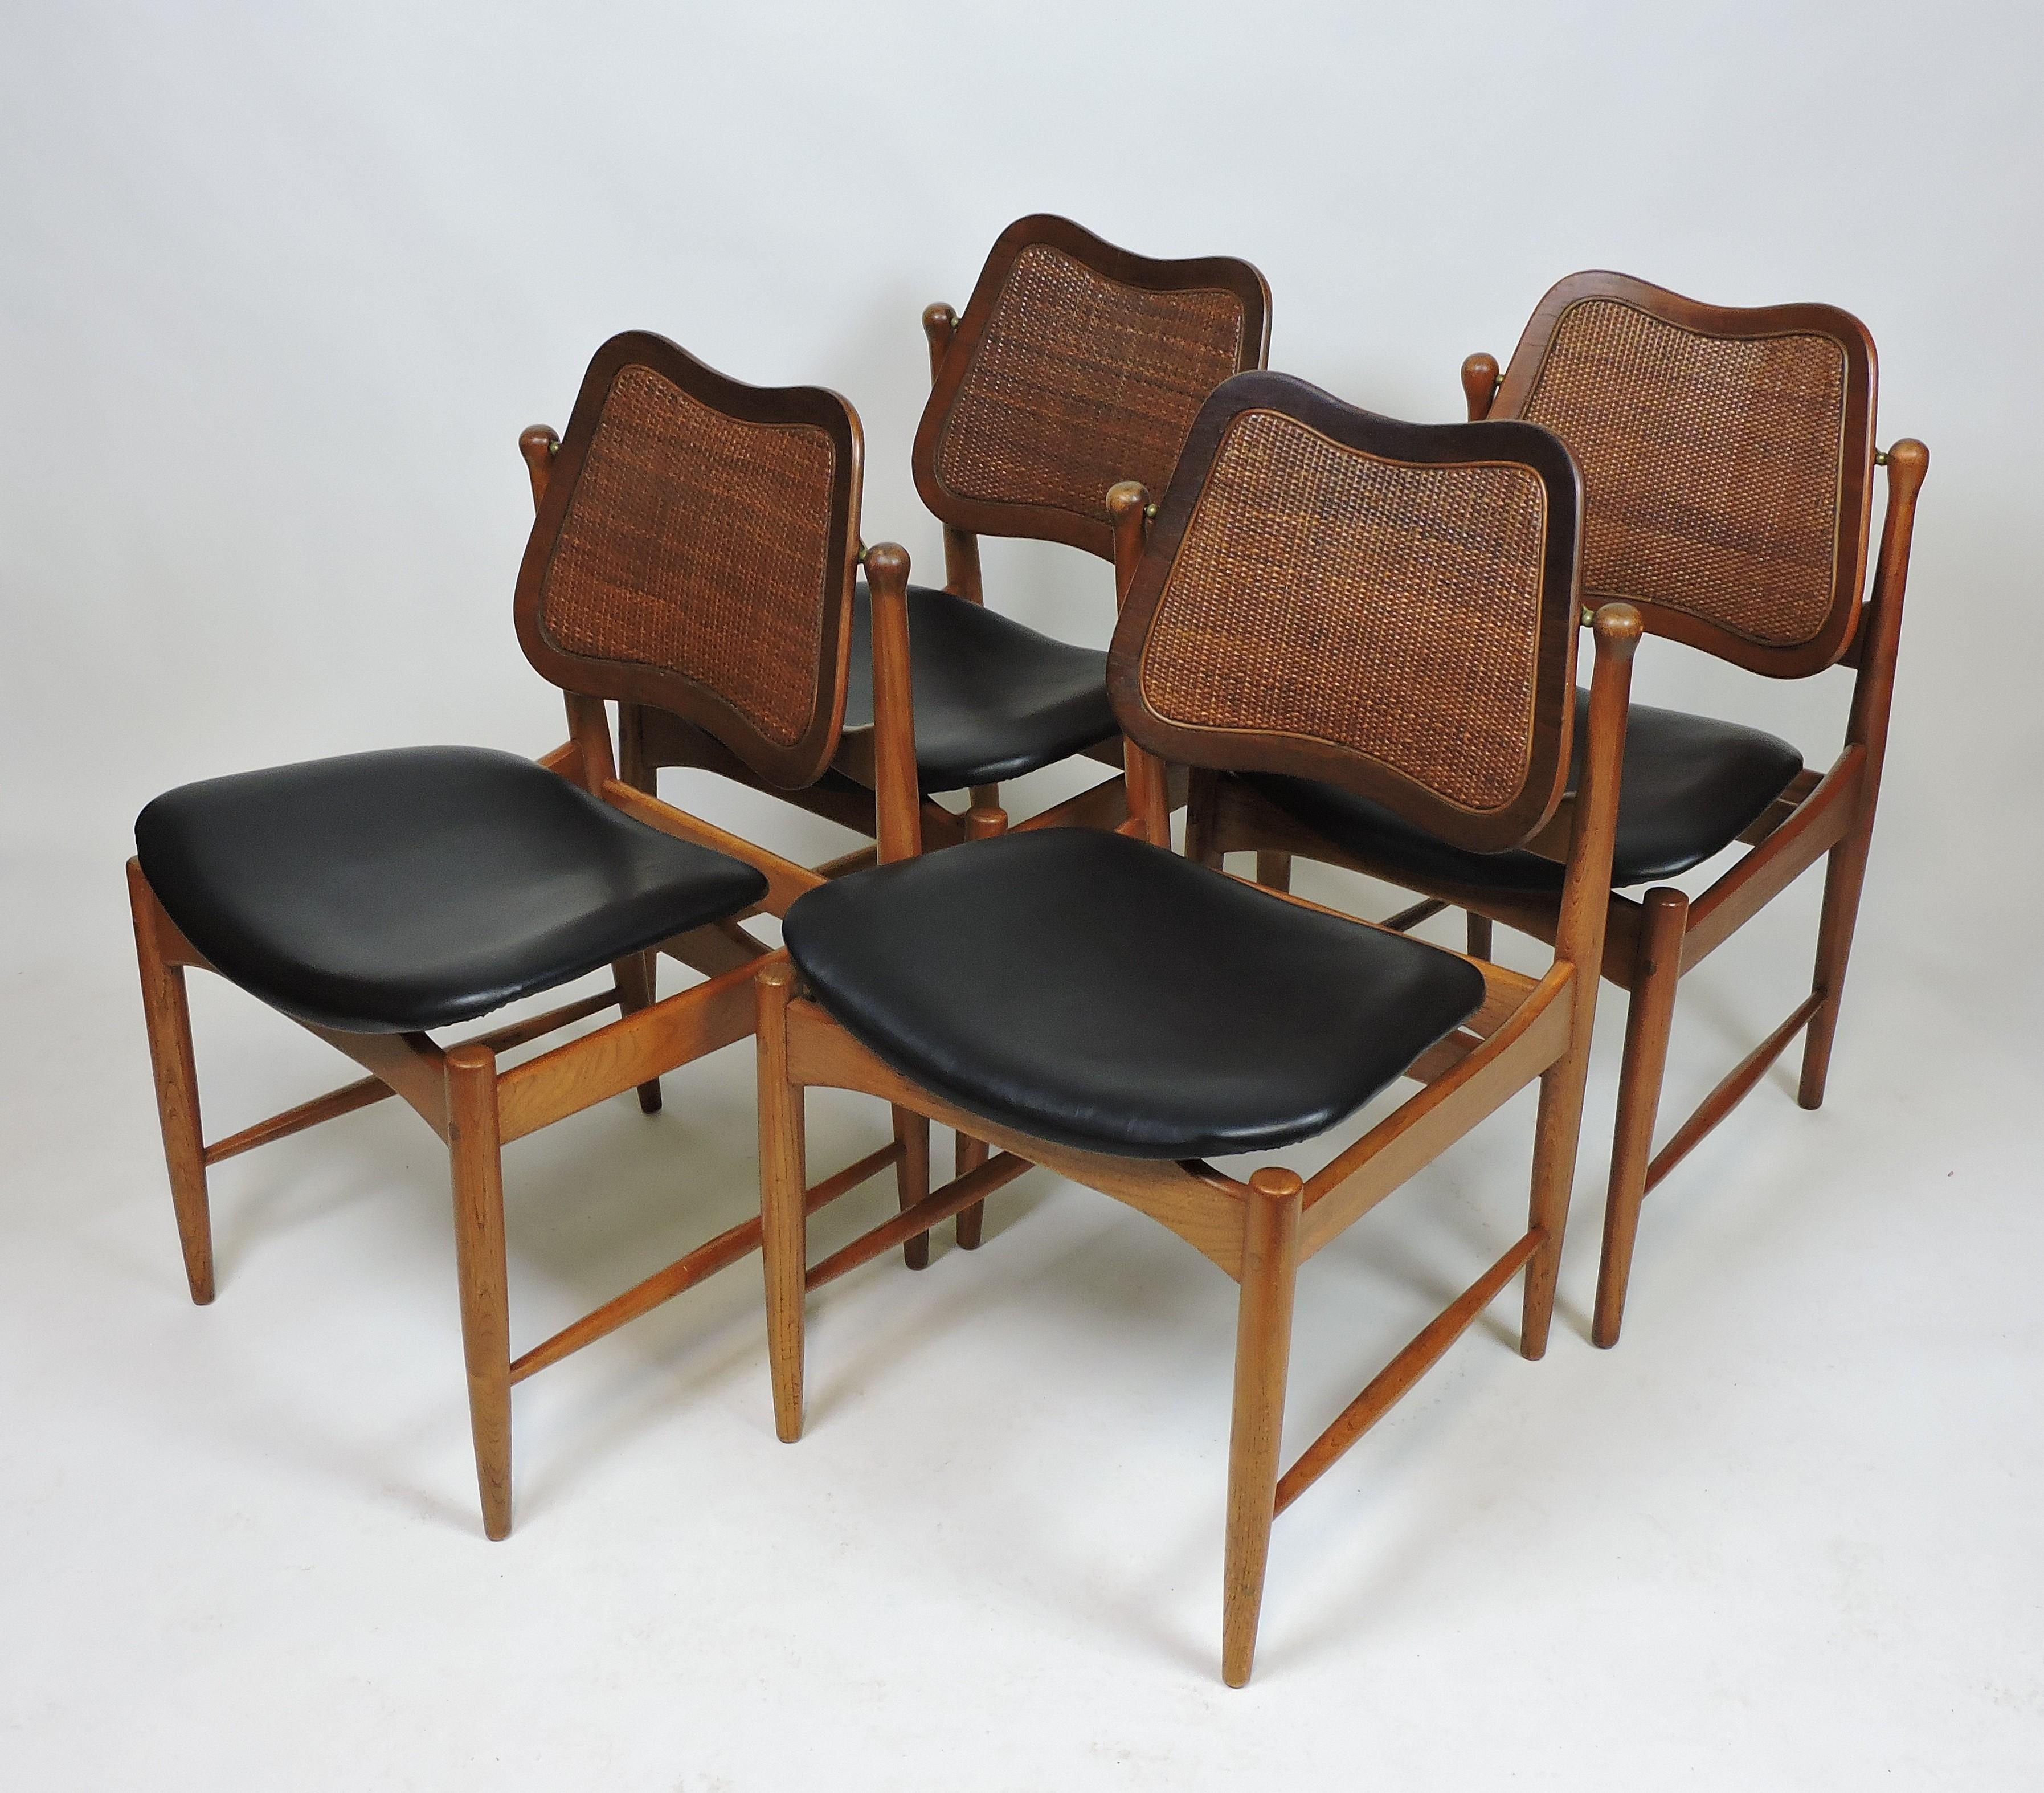 Set of four dining chairs designed by Arne Vodder. These beautiful chairs have floating seats covered in black naugahyde and backs inset with cane that pivot on brass fittings for comfort.